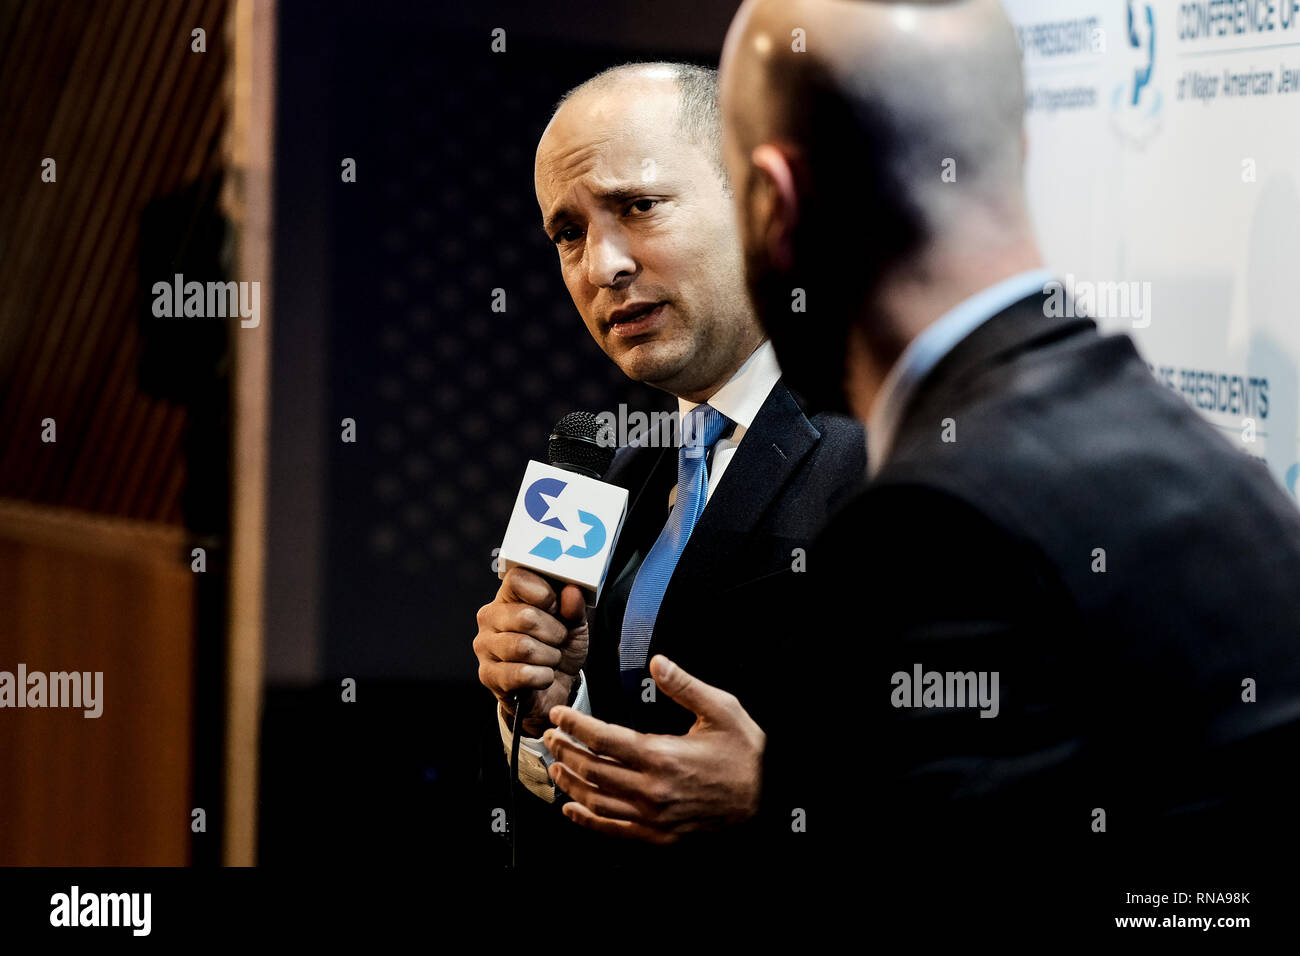 Jerusalem, Israel. 18th February, 2019. NAFTALI BENNET, Minister of Education and Diaspora Affairs and Head of The New Right Party, is interviewed at the  45th Conference of Presidents of Major American Jewish Organizations Leadership Mission to Israel (COP) at the Inbal Hotel in Jerusalem. More than 100 American leaders from the Conference's 53 member organizations and its National Leadership Council participate. Credit: Nir Alon/Alamy Live News Stock Photo